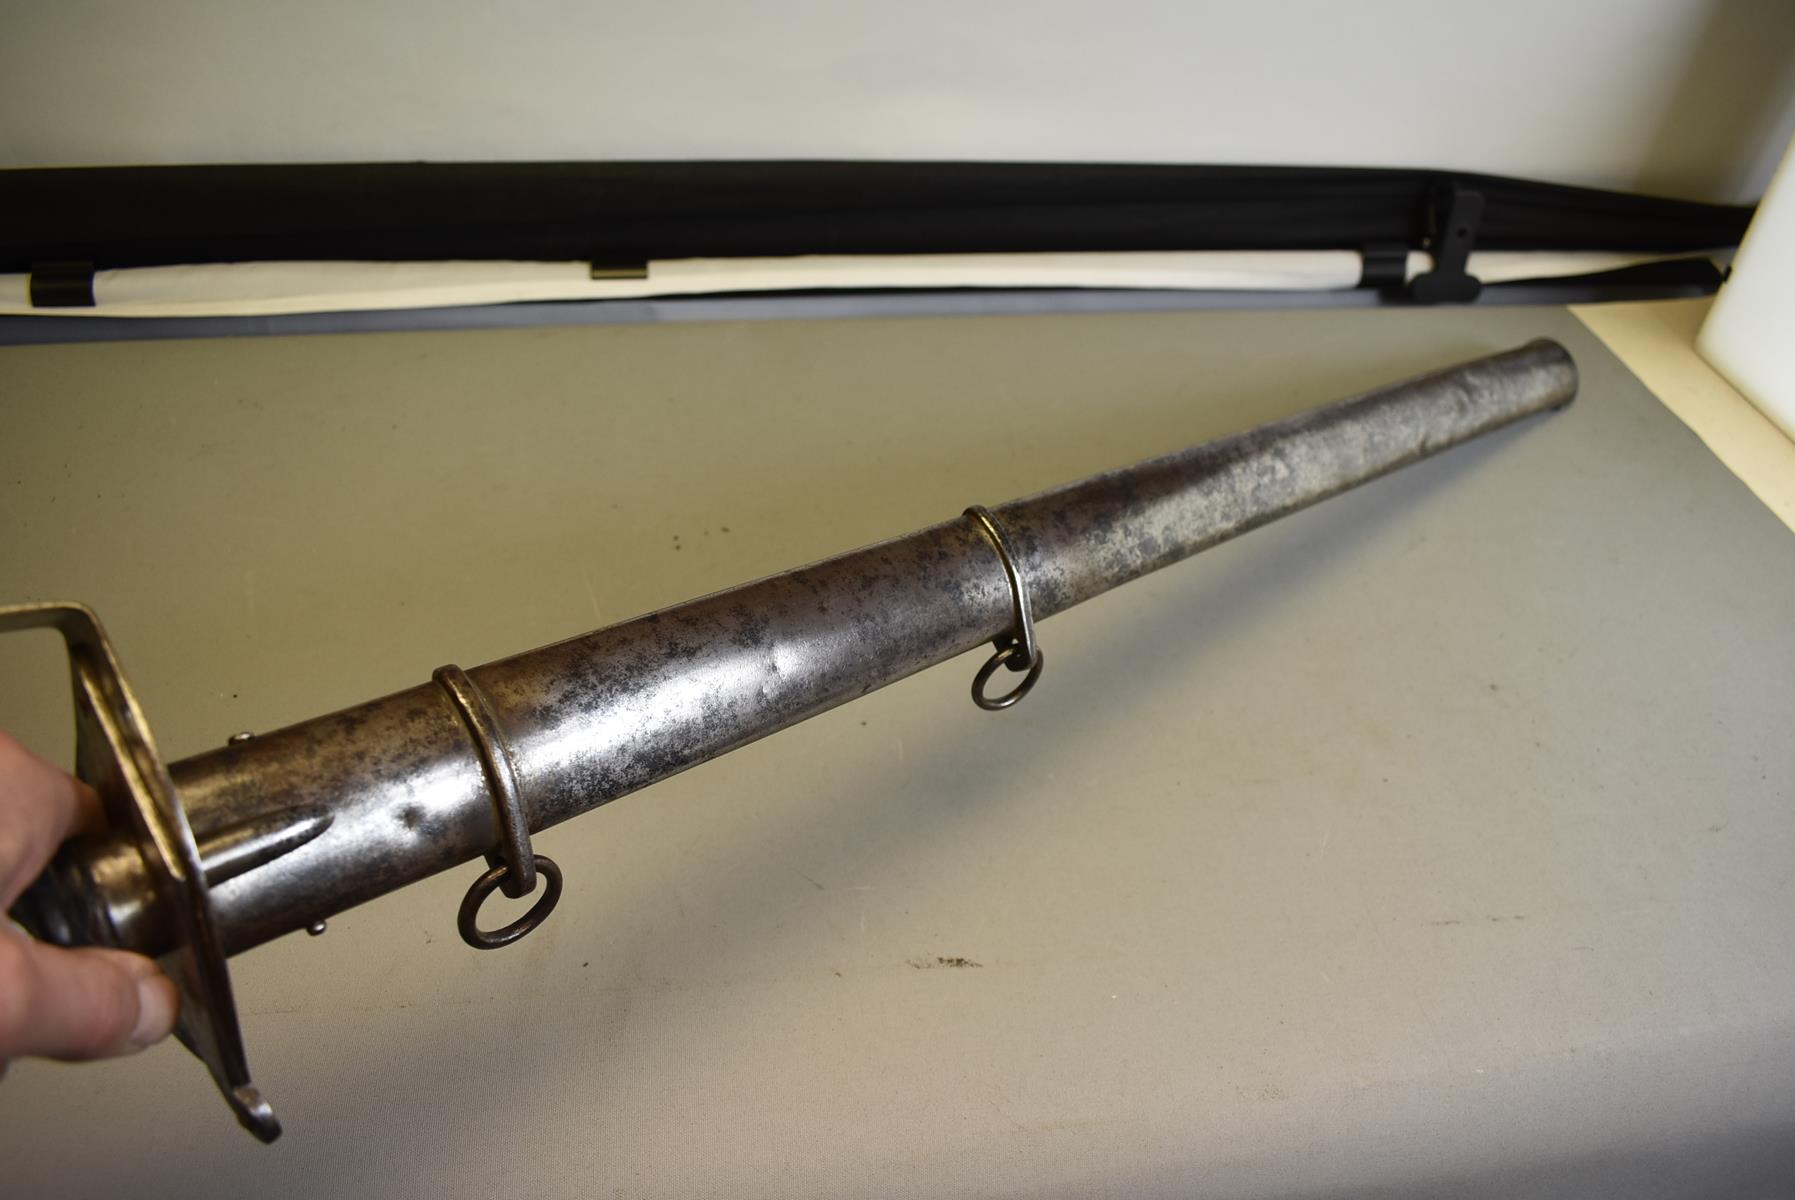 A 1796 PATTERN HEAVY CAVALRY TROOPER'S SWORD, 88cm blade with spear point, regulation steel hilt - Image 9 of 9